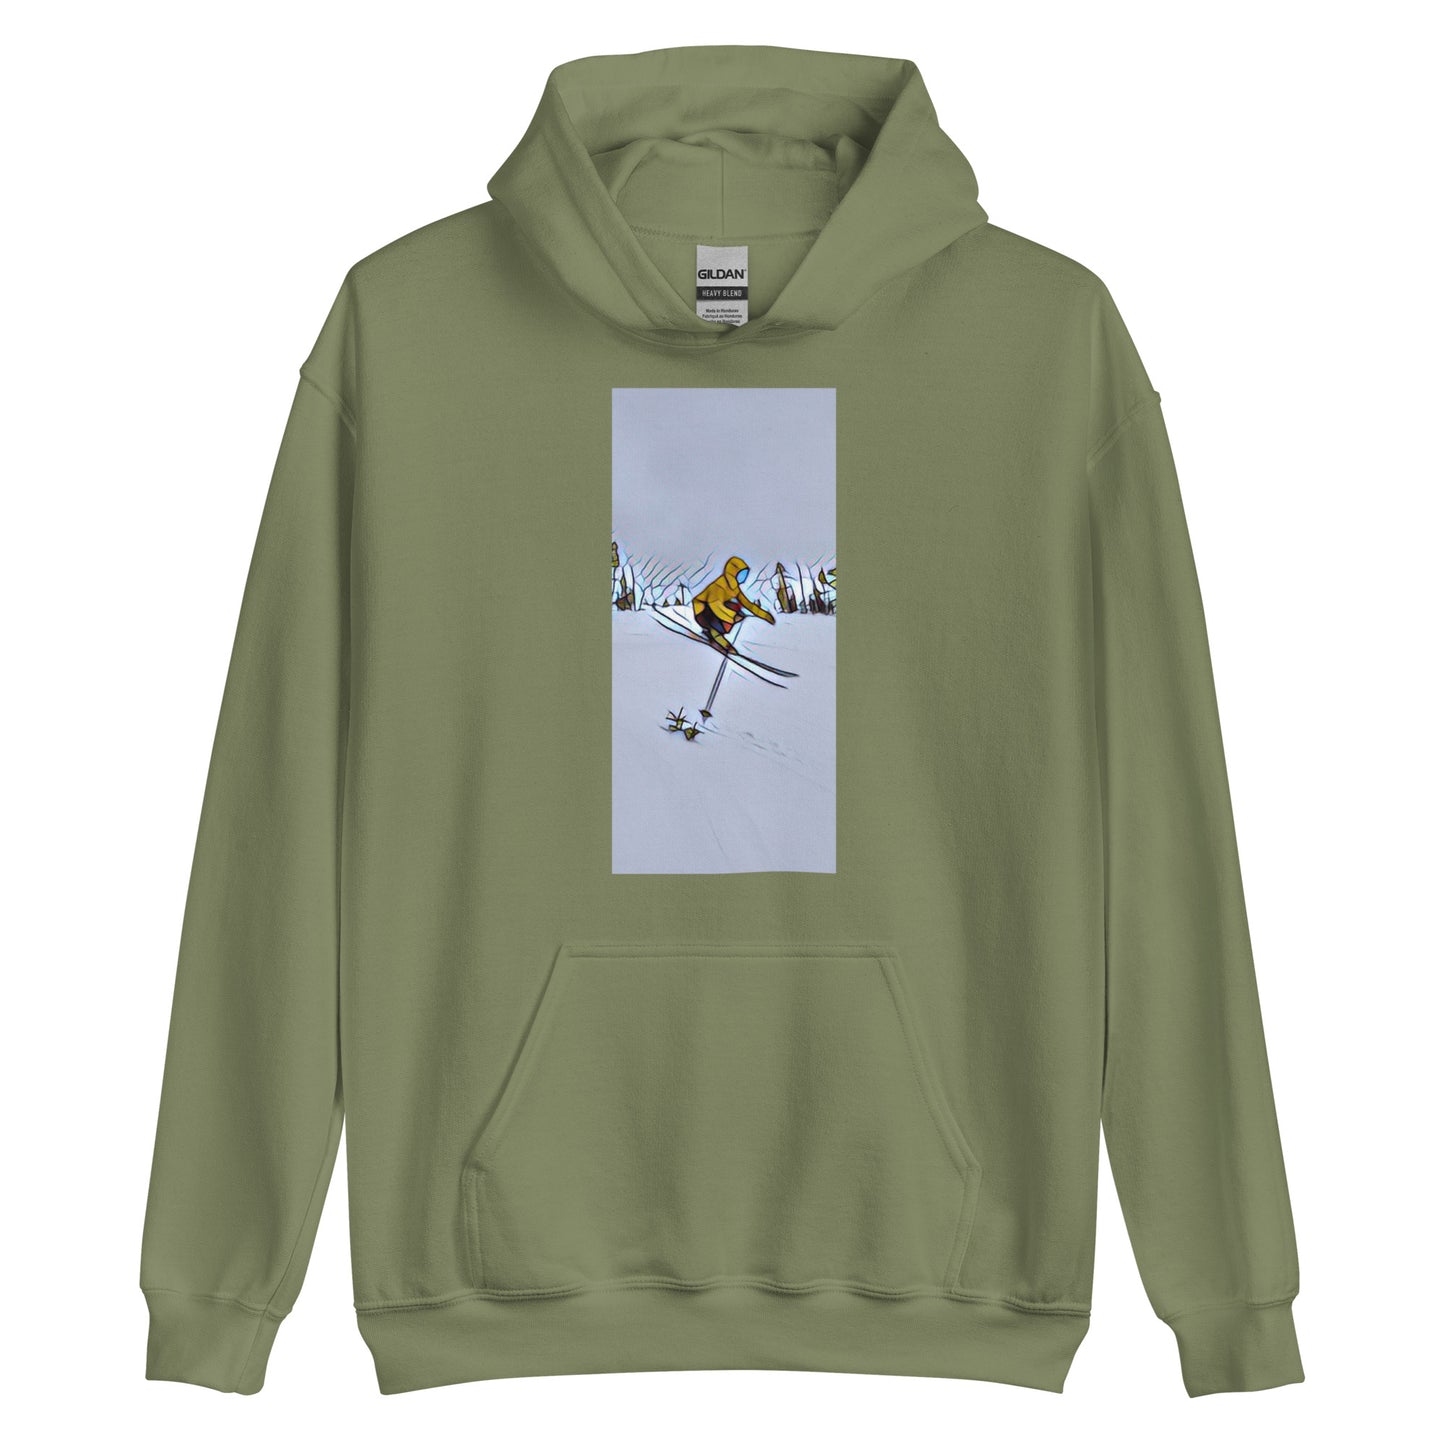 Is there anything better than flying though the air? (Hoodie)